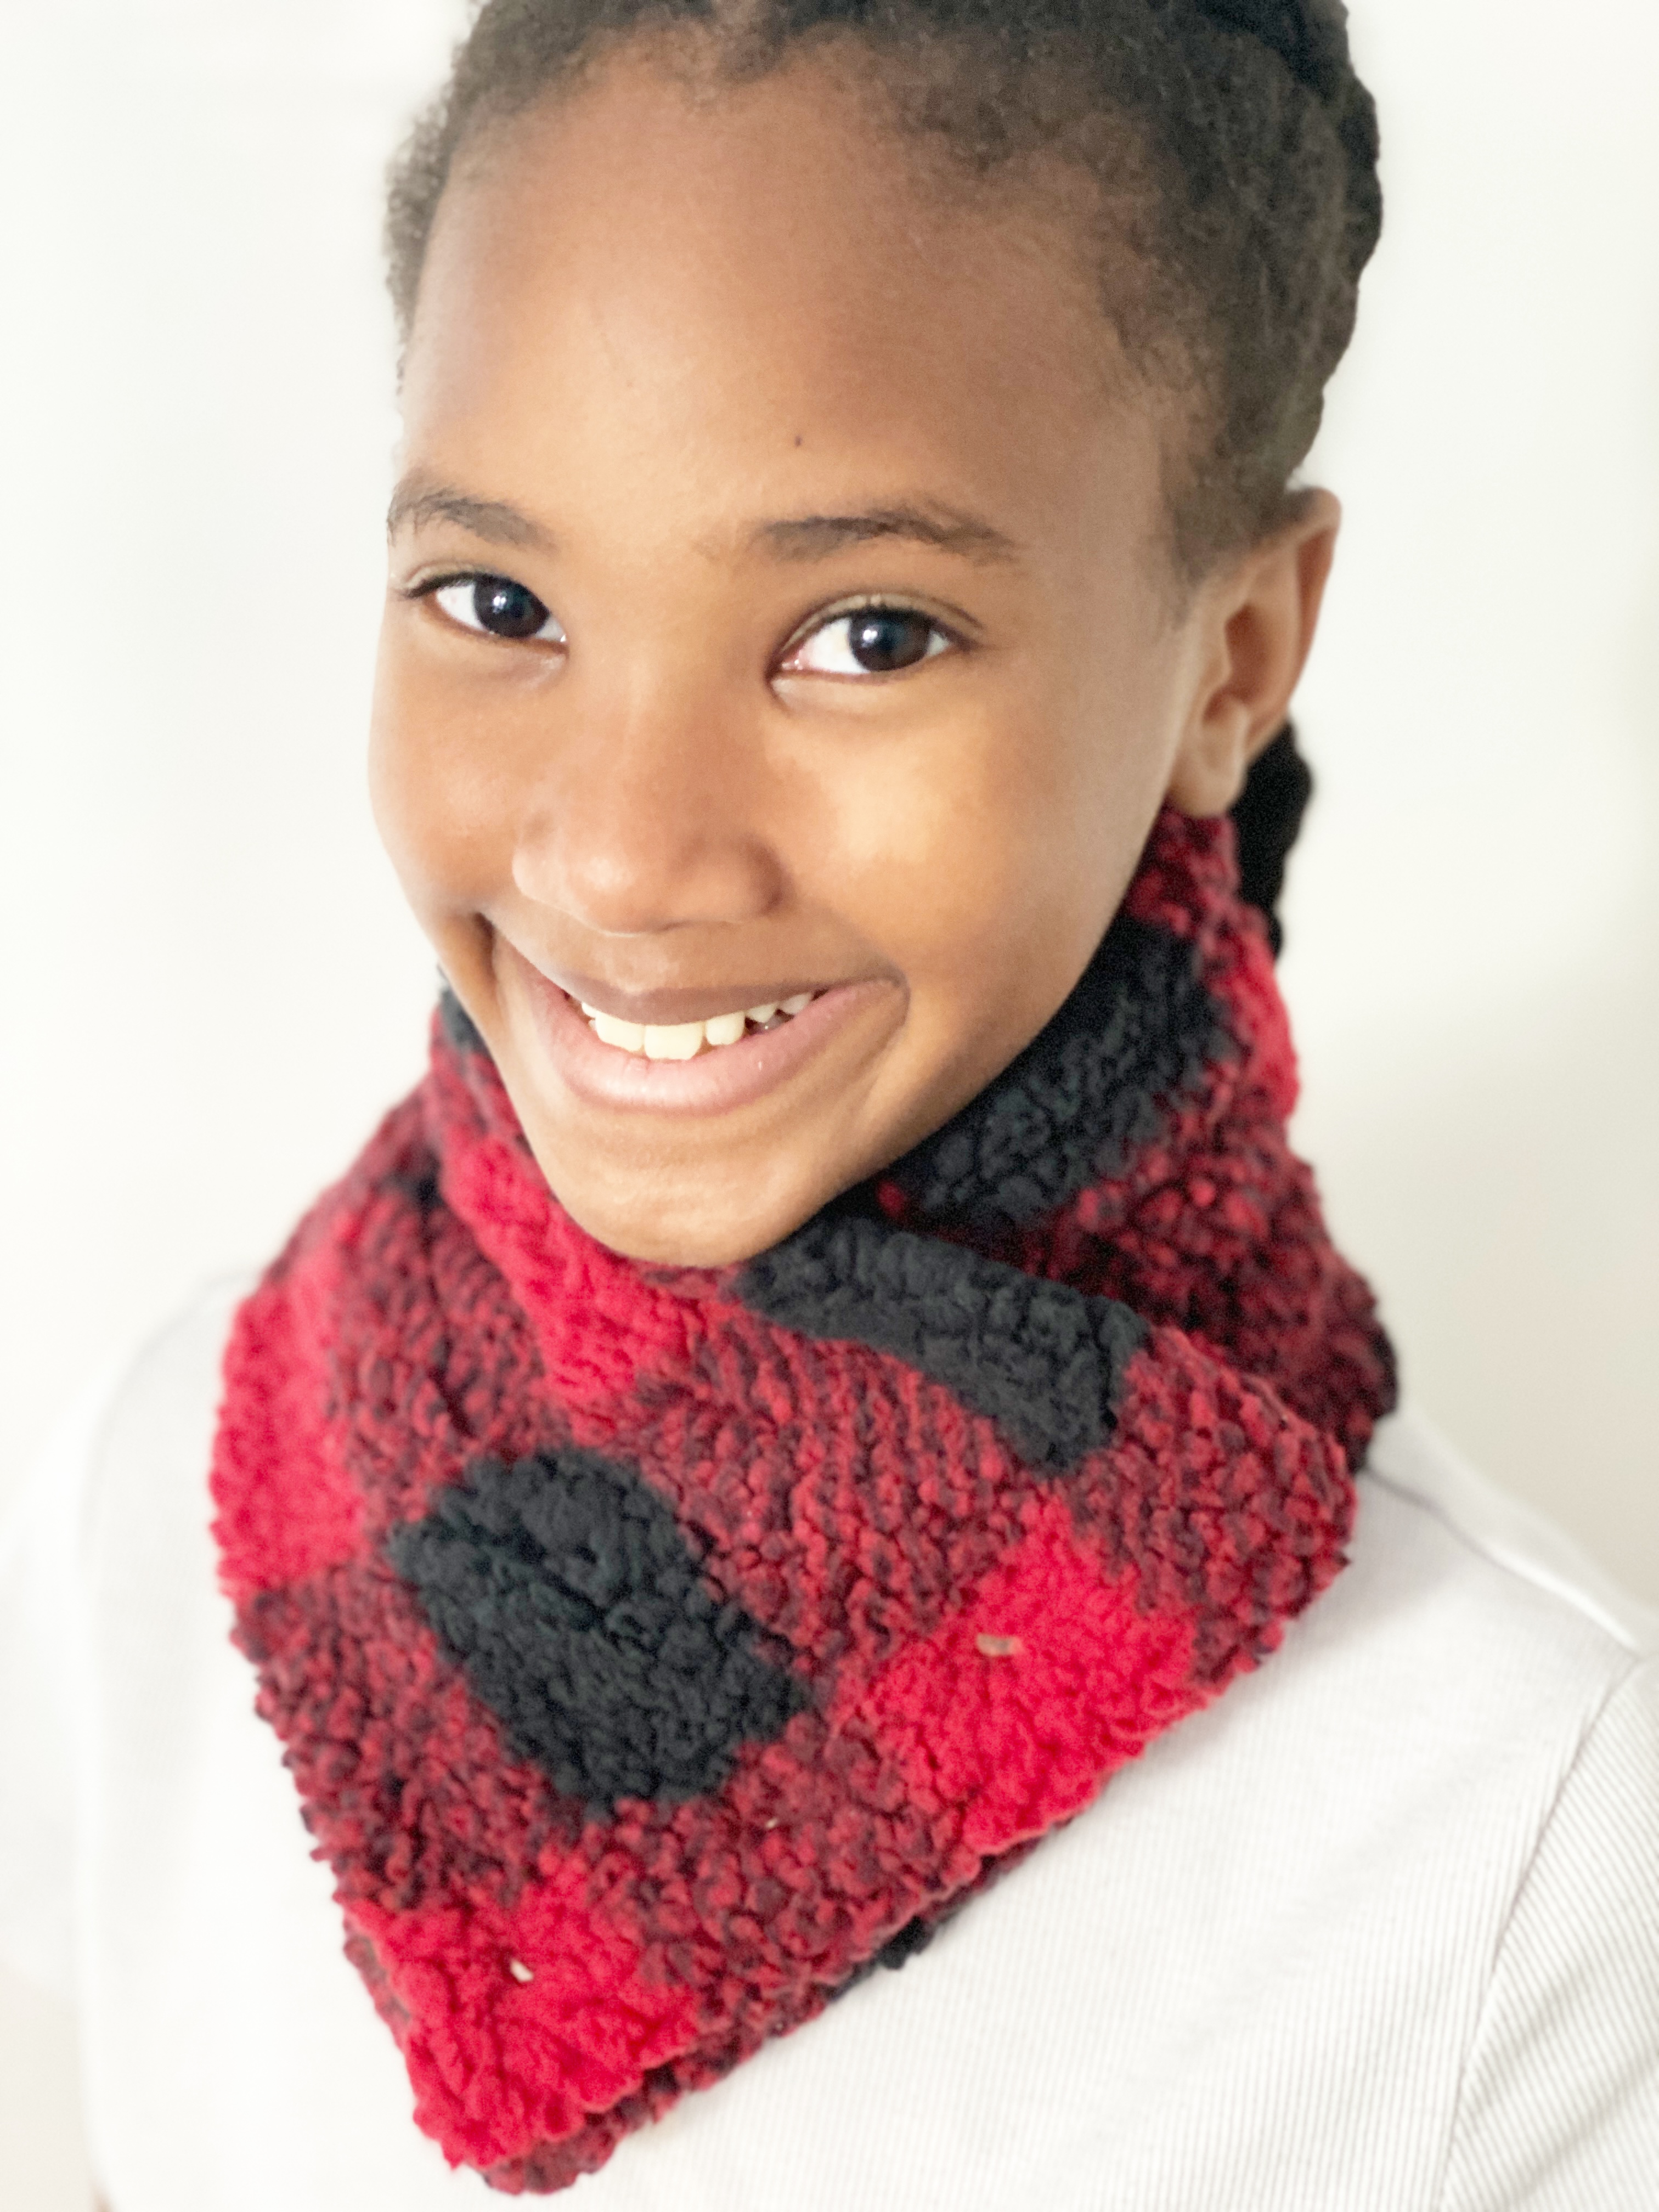 How To Make a Sherpa Neck Warmer - WeAllSew